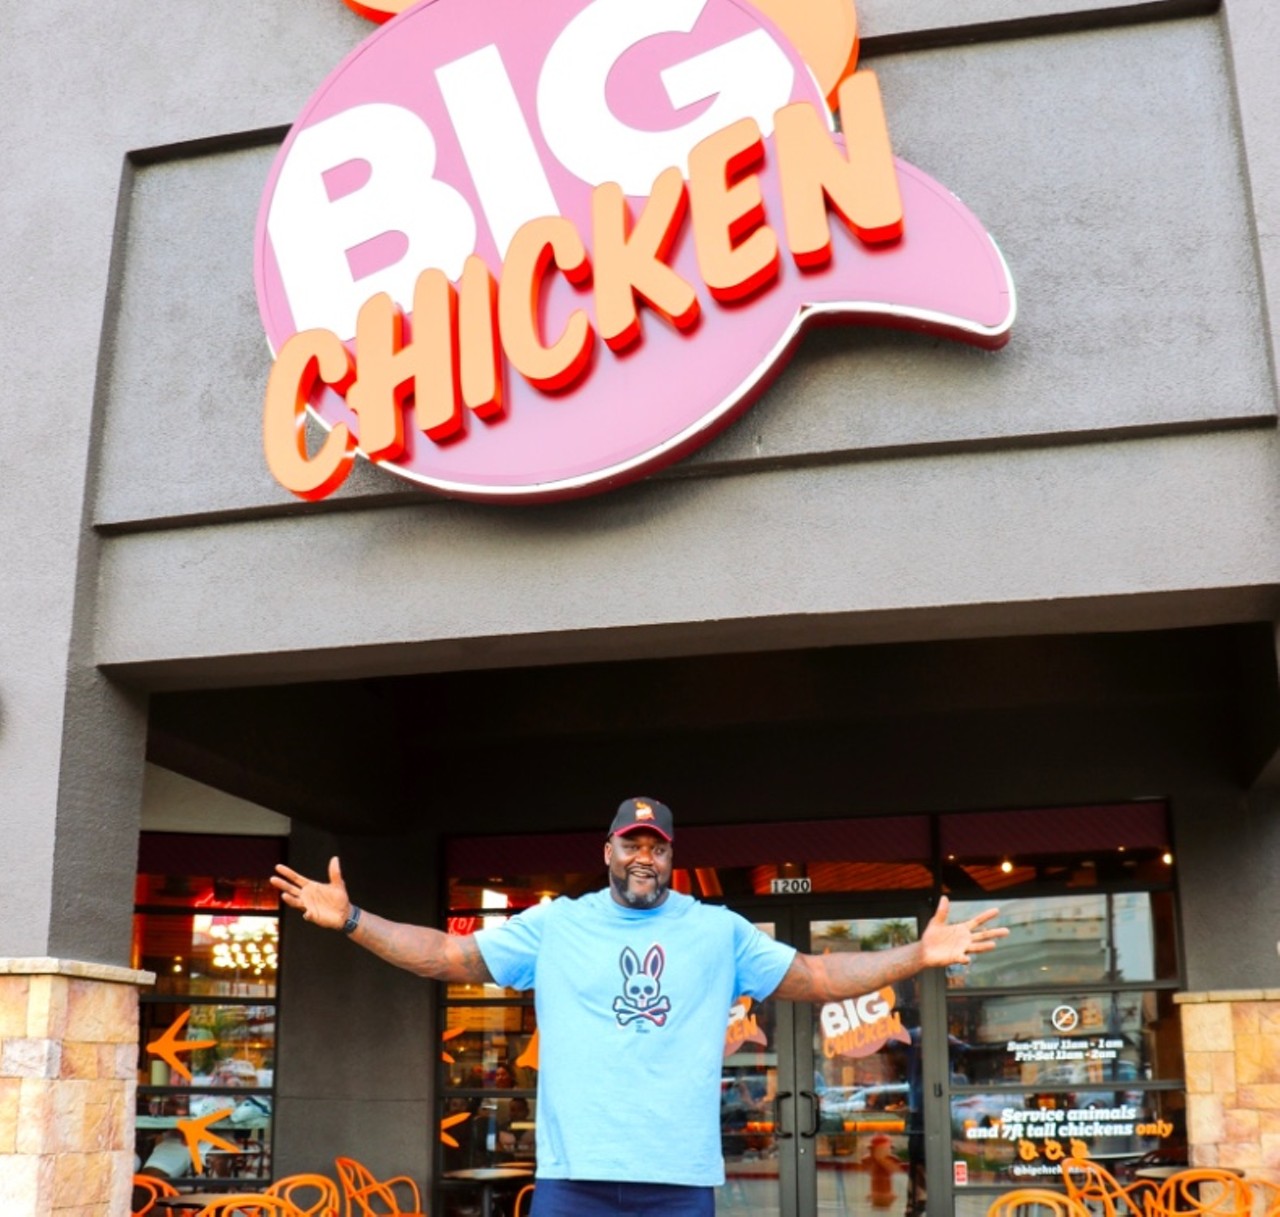 Big Chicken
250 E. Michigan St.
The slam dunk of chicken into fryers, Shaq-style, is looming ever closer for Orlando. The casual chicken spot's menu is a combination of Shaq's home-cooked childhood favorites and the hottest trending flavors, chock-full of chicken sandwiches, tendies and more.